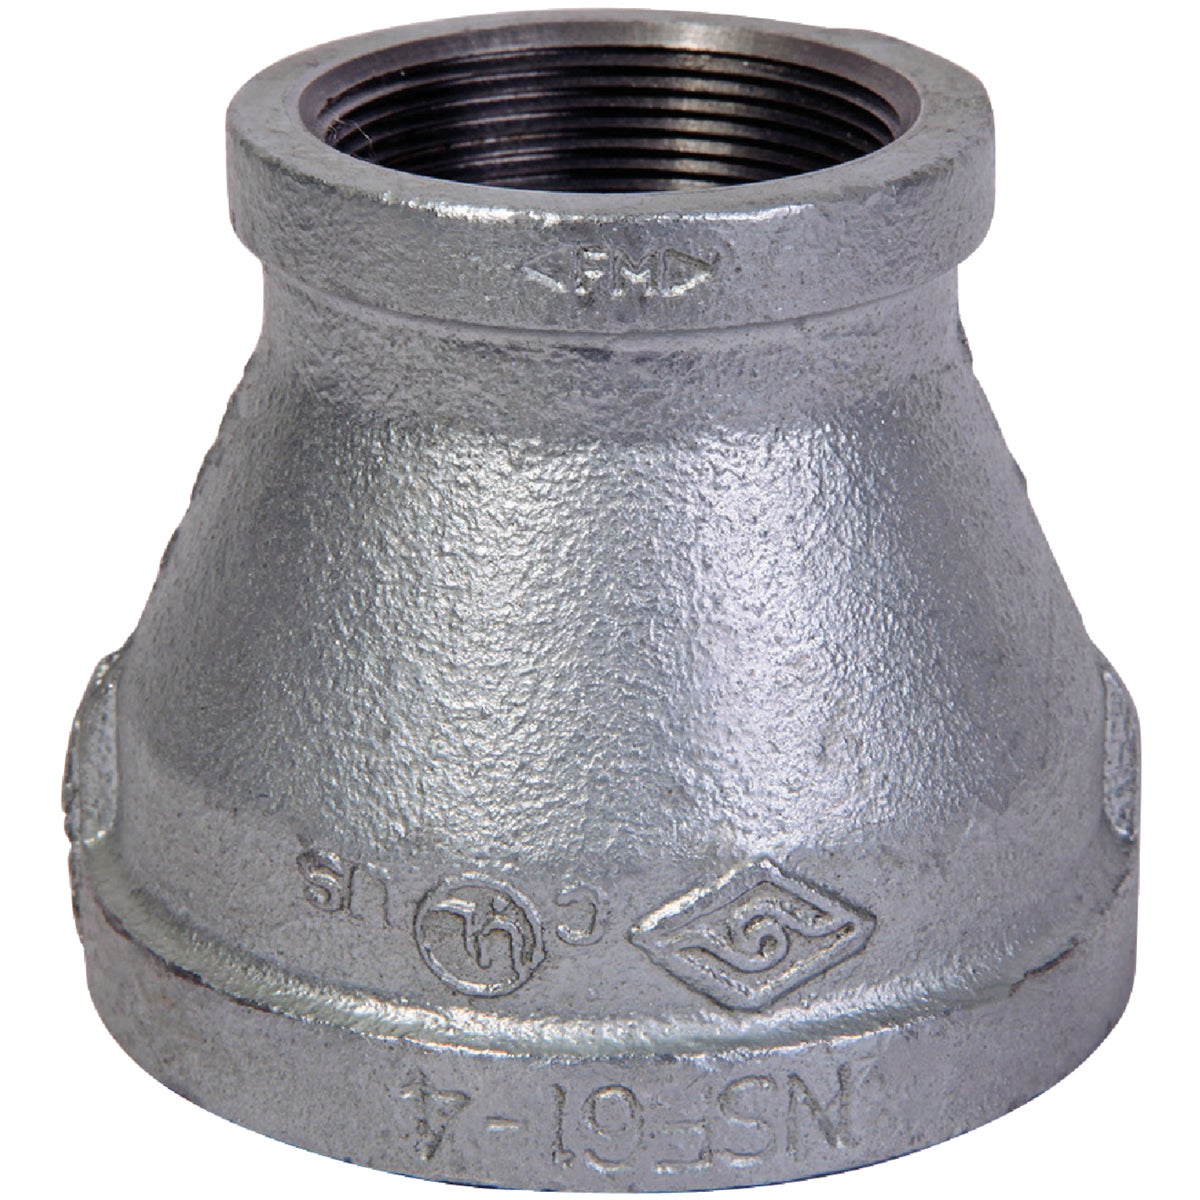 Southland 511-376BG Southland 1-1/2 In. x 1-1/4 In. FPT Reducing Galvanized Coupling 511-376BG